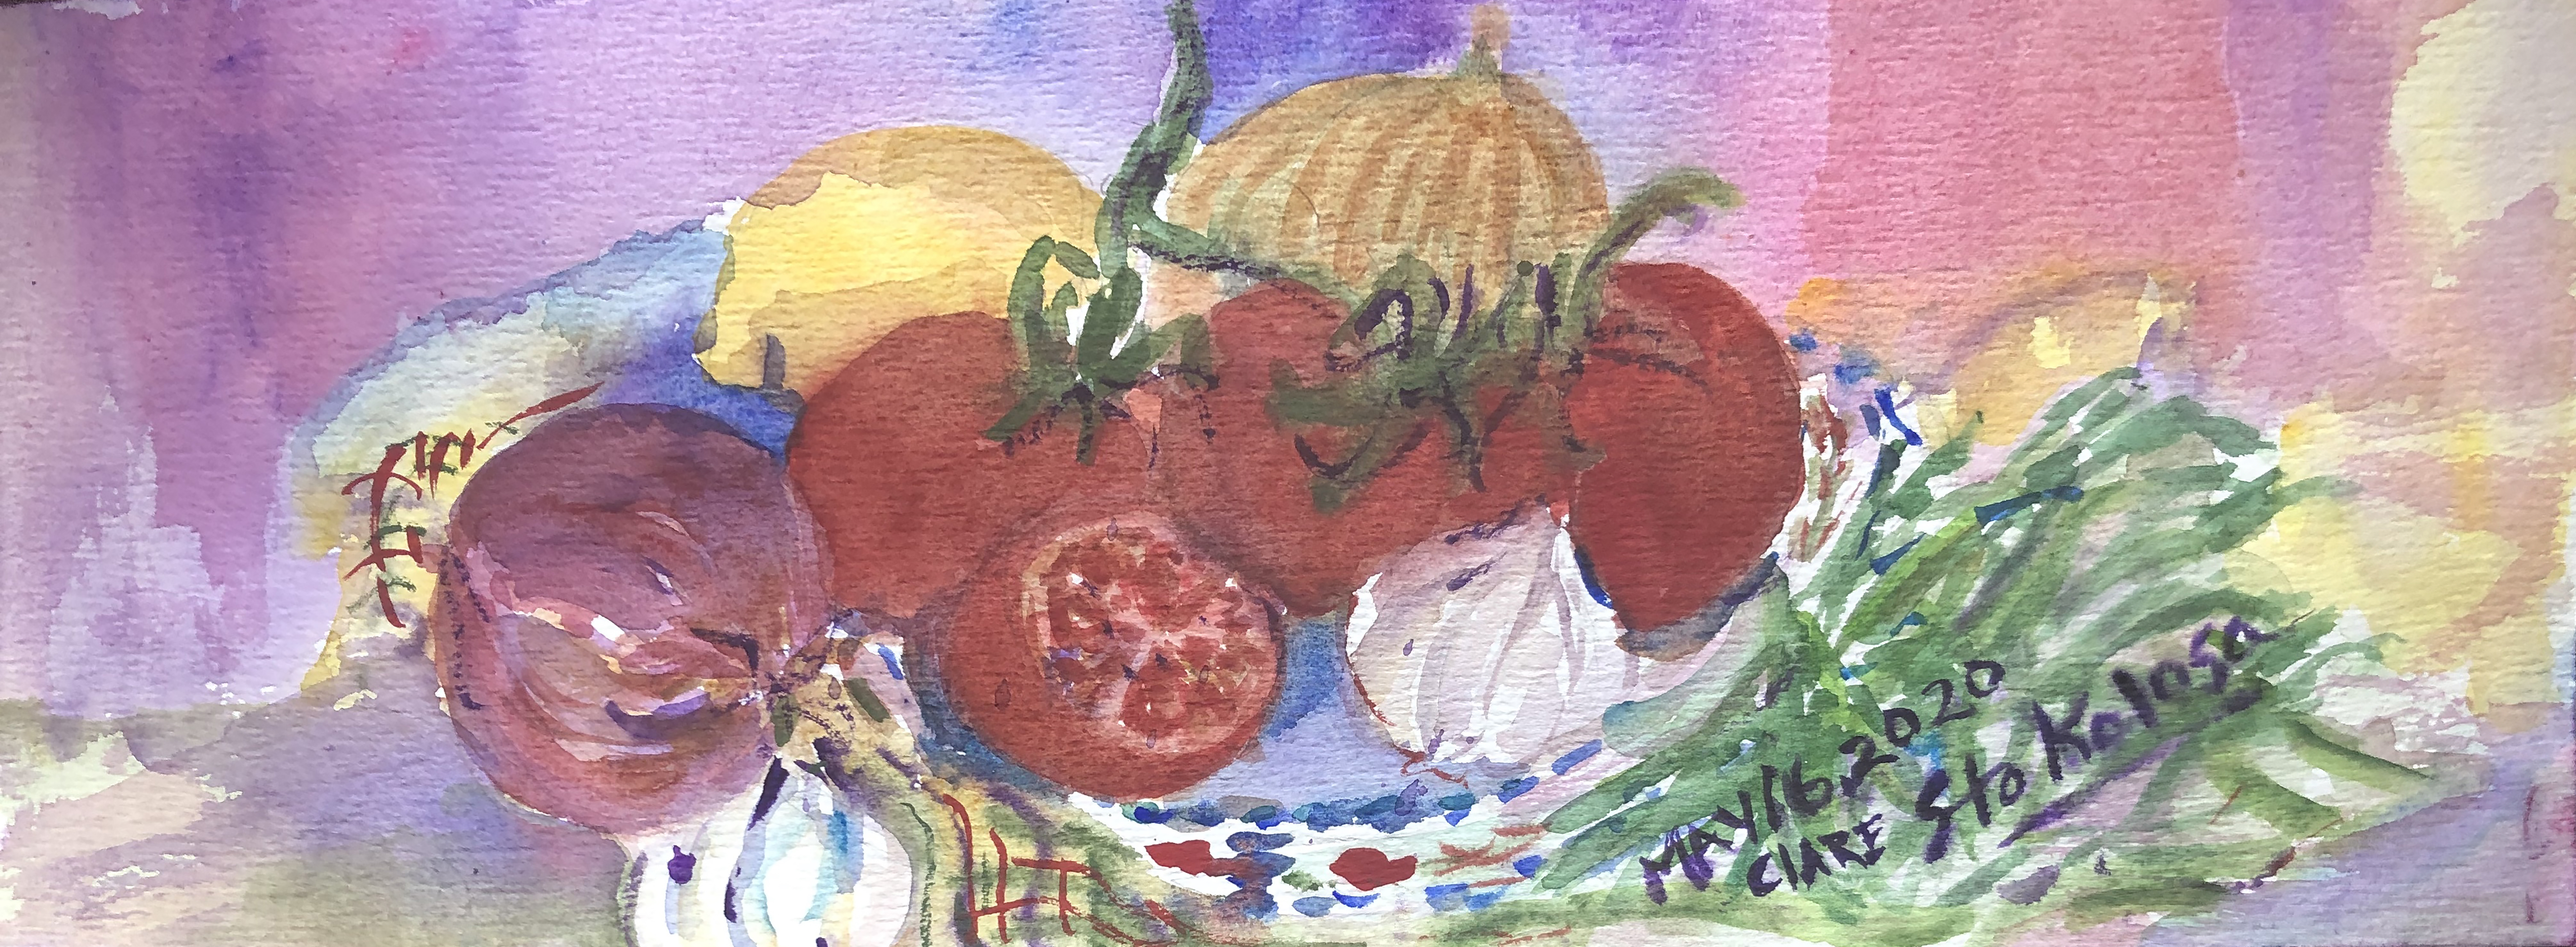 Clare_S_SauPtee_Some_Onions_and_Garlic_6x15.5in